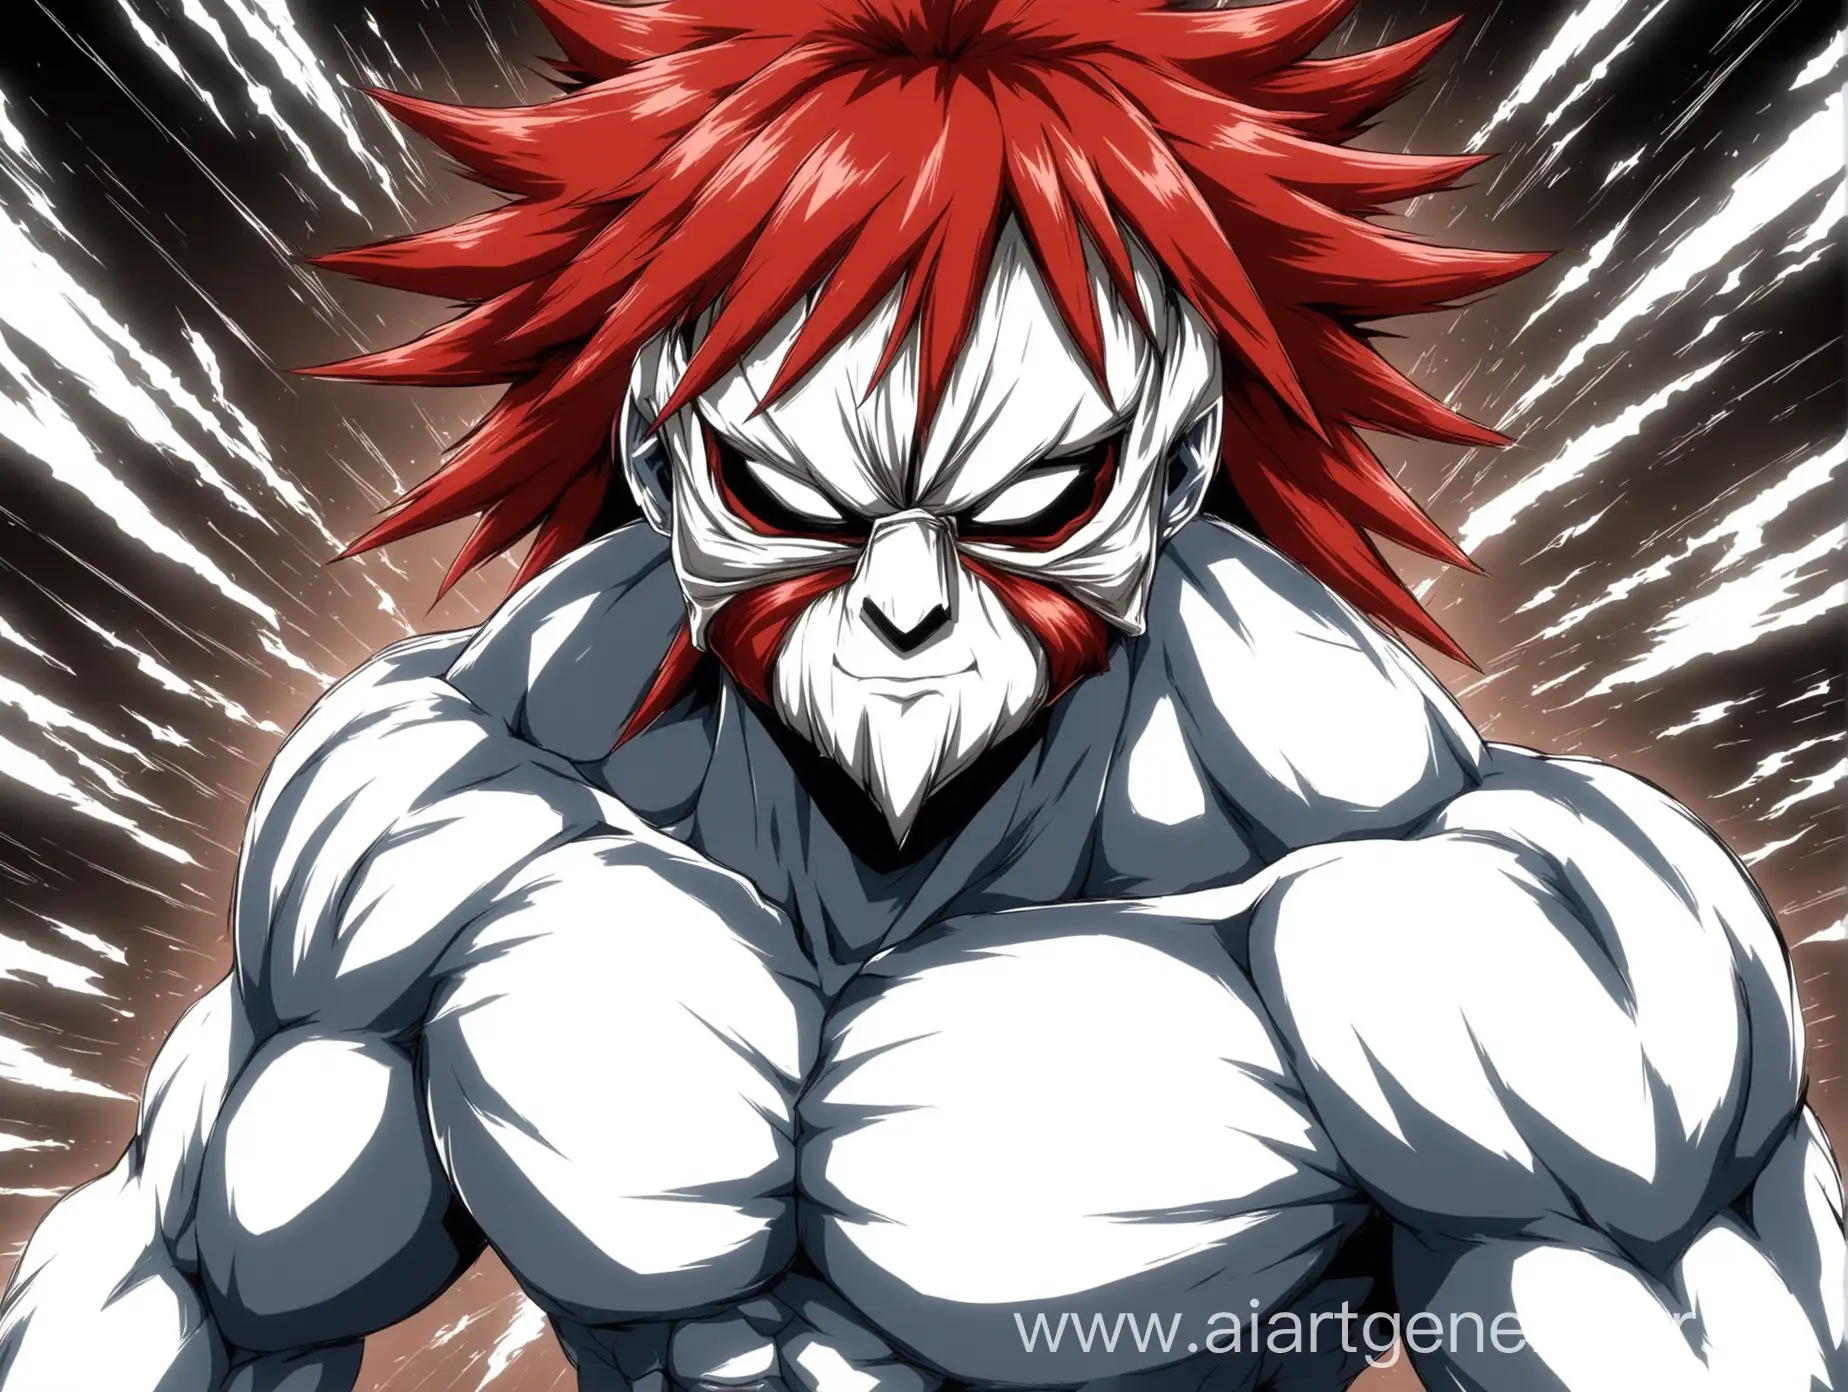 Aggressive-Anime-Character-with-Hyperdetailed-Features-Buff-Physique-White-Mask-and-Red-Hair